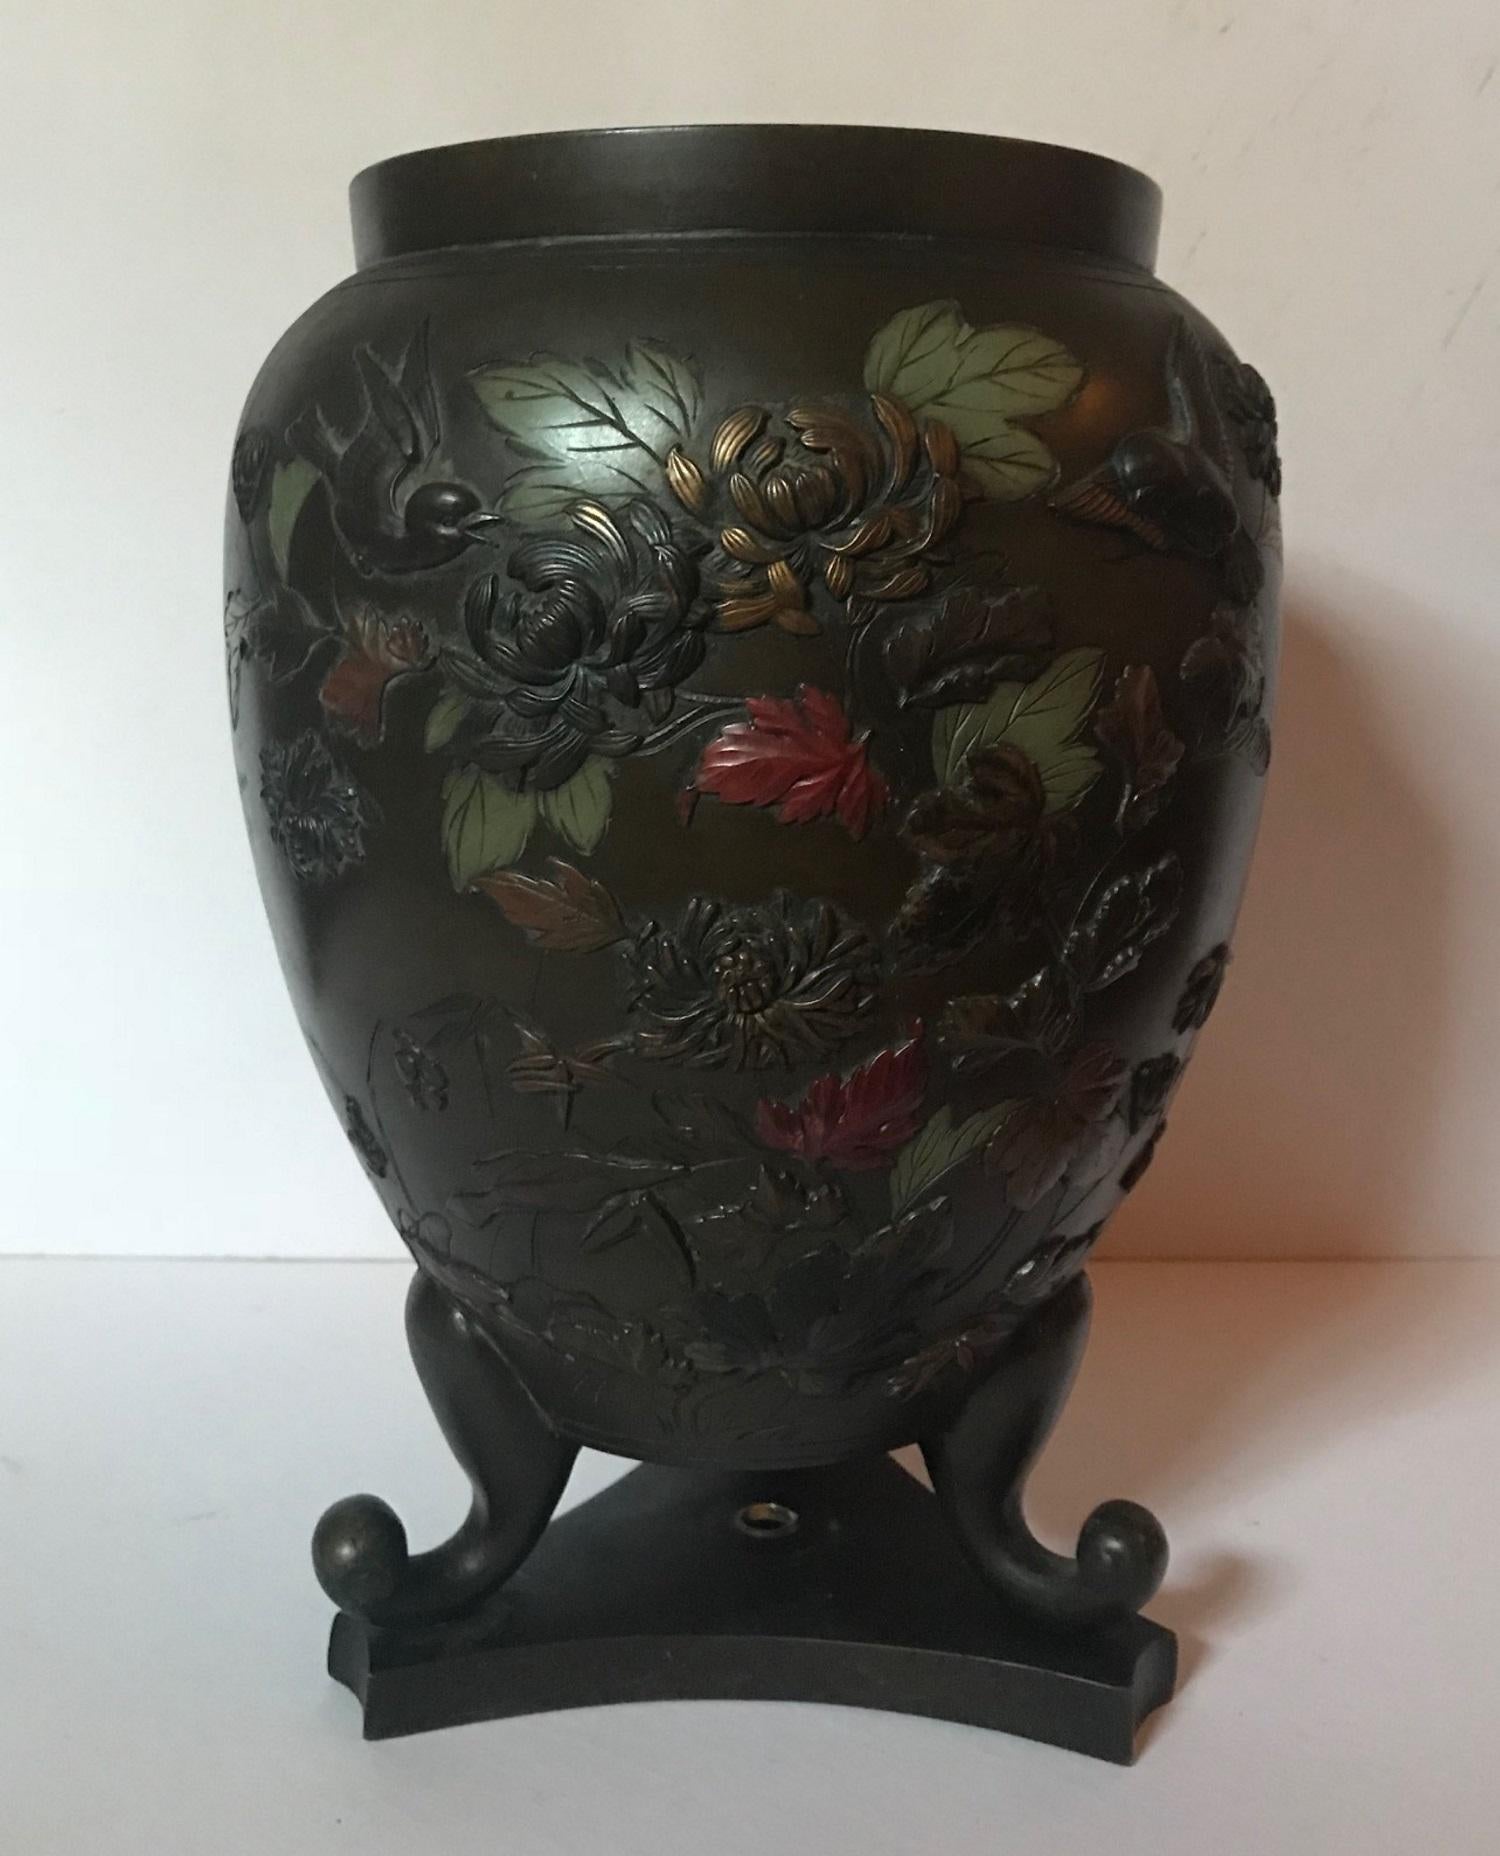 This beautiful baluster shaped bronze vase has a rich dark patina. The entire body is adorned with abundant foliage, blossoms and swallows in relief casting. Every flower is highlighted in muted colors with gilt accents. The vase sits on three